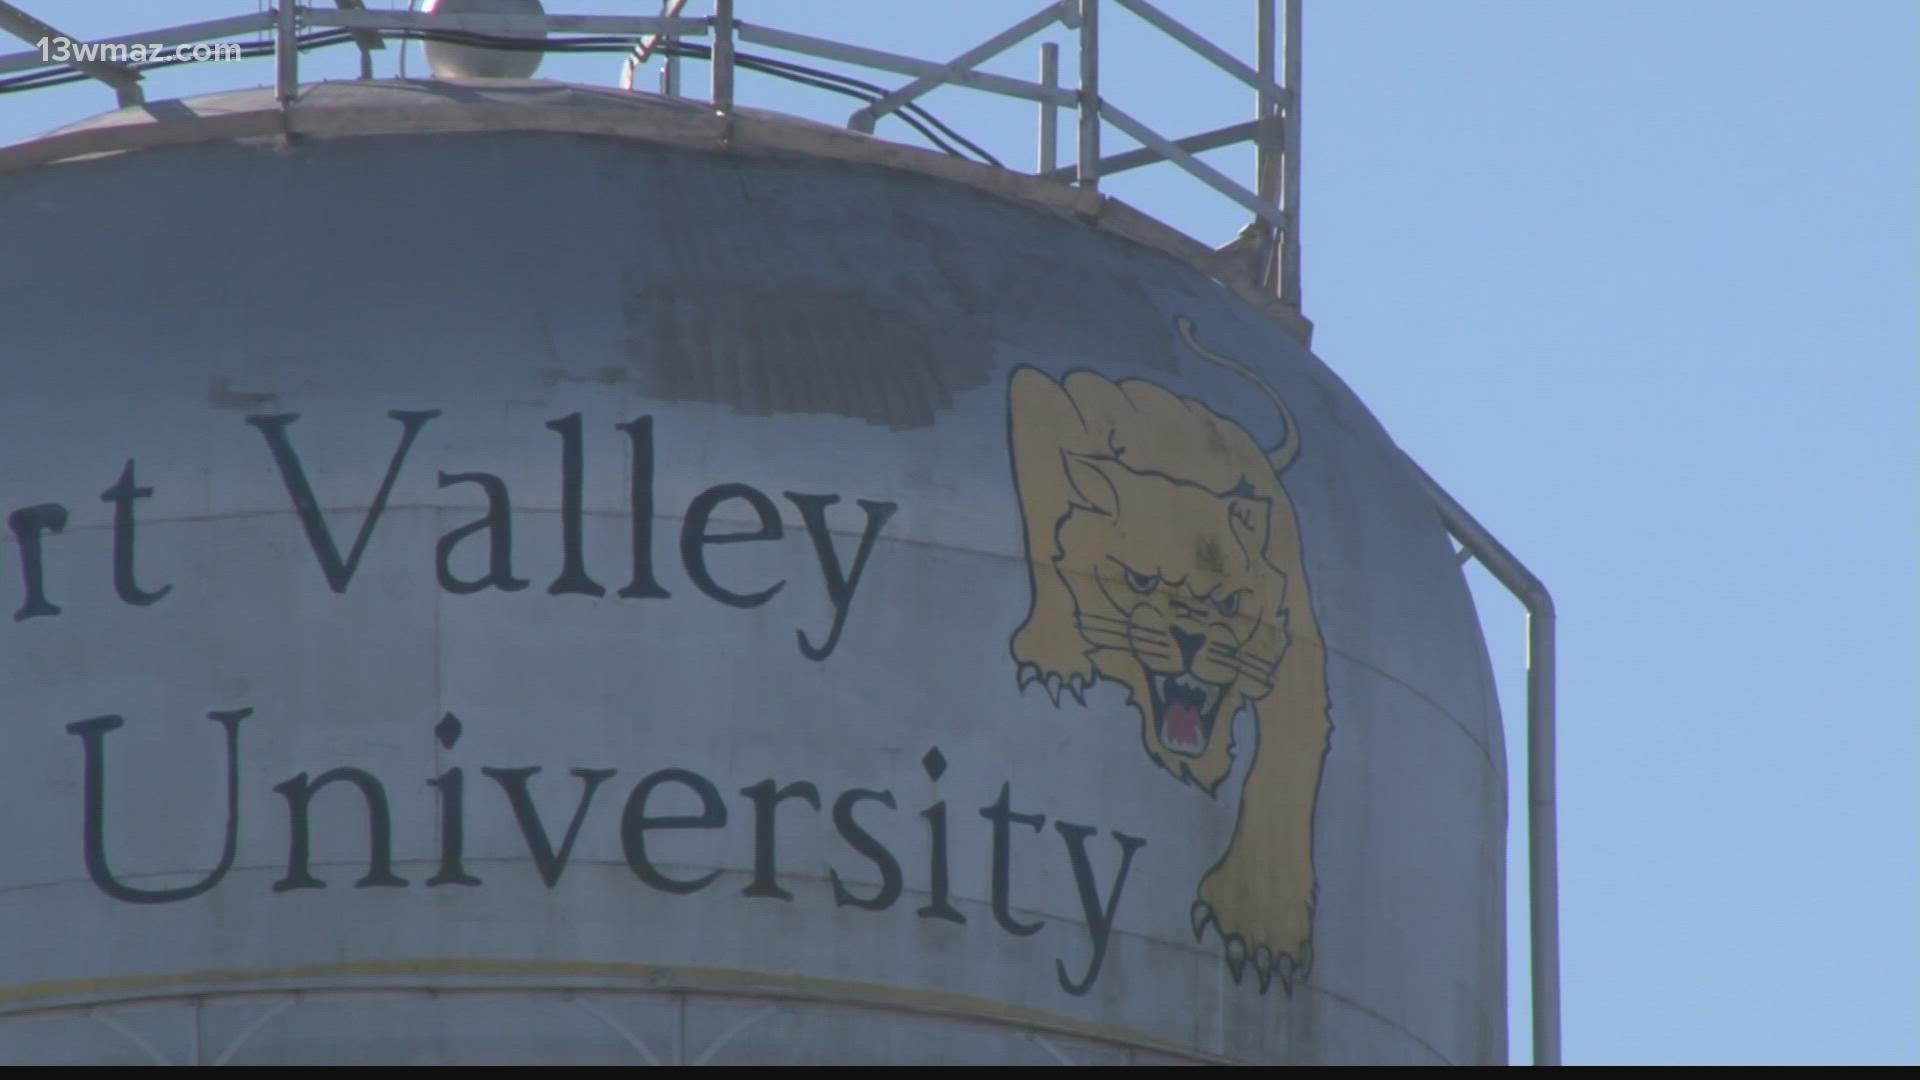 Fort Valley State says that they will award 500 students up to $5,000 over the next three years.